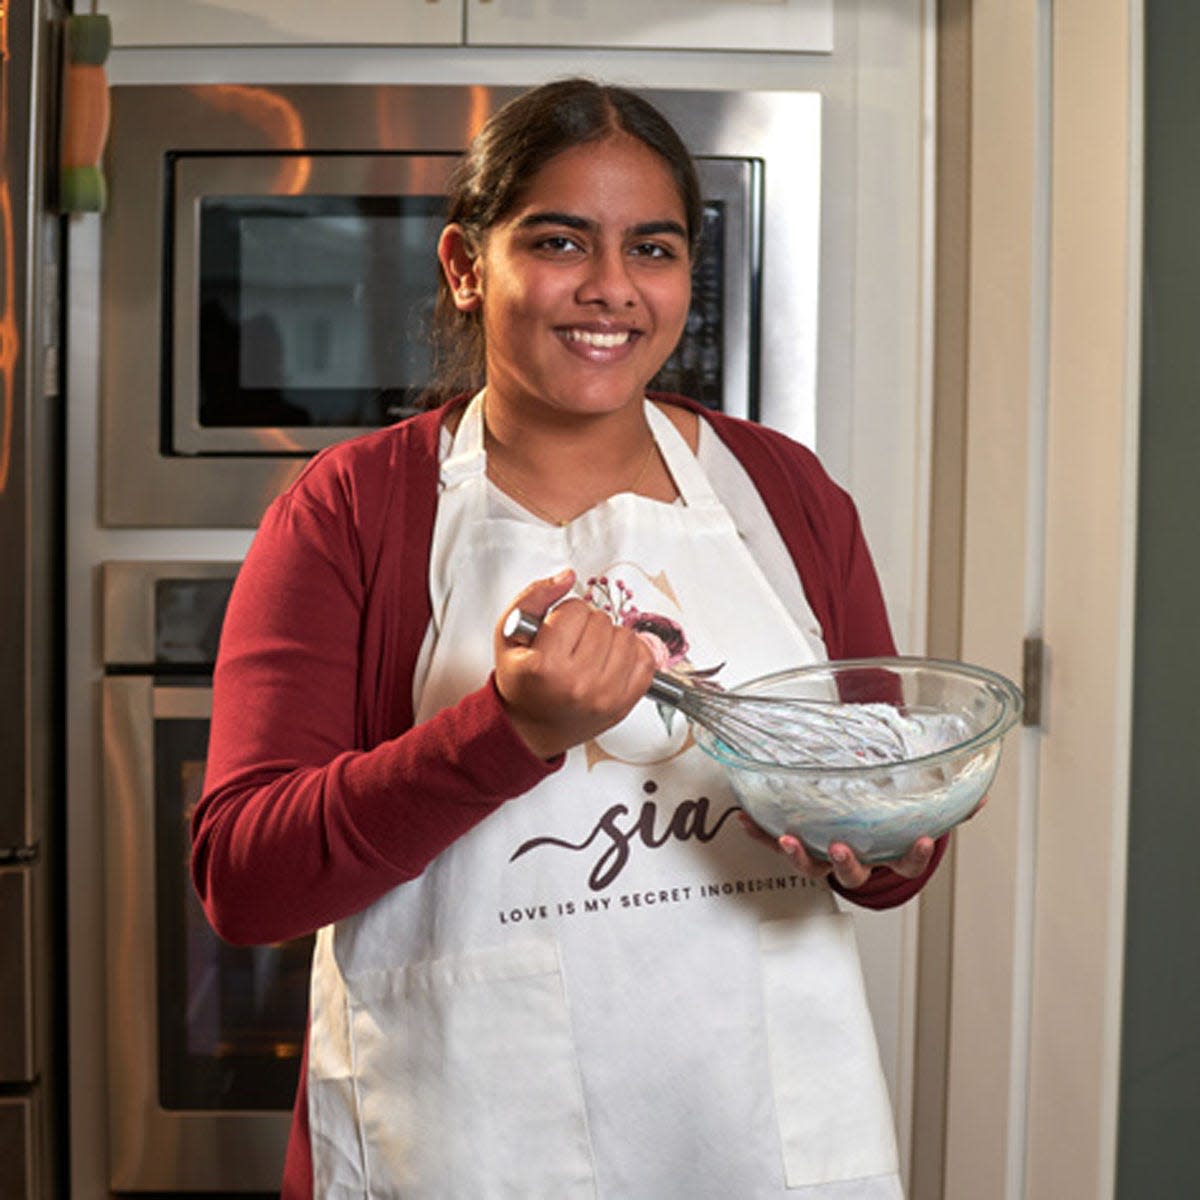 Sia Agnihotri is Story County Alliance for Philanthropy’s Rising Star Philanthropist. Agnihotri's Jars of Hope fundraising campaign sold more than 500 cheesecake jars and used the proceeds to help alleviate the suffering caused by a second wave of COVID-19 in India.